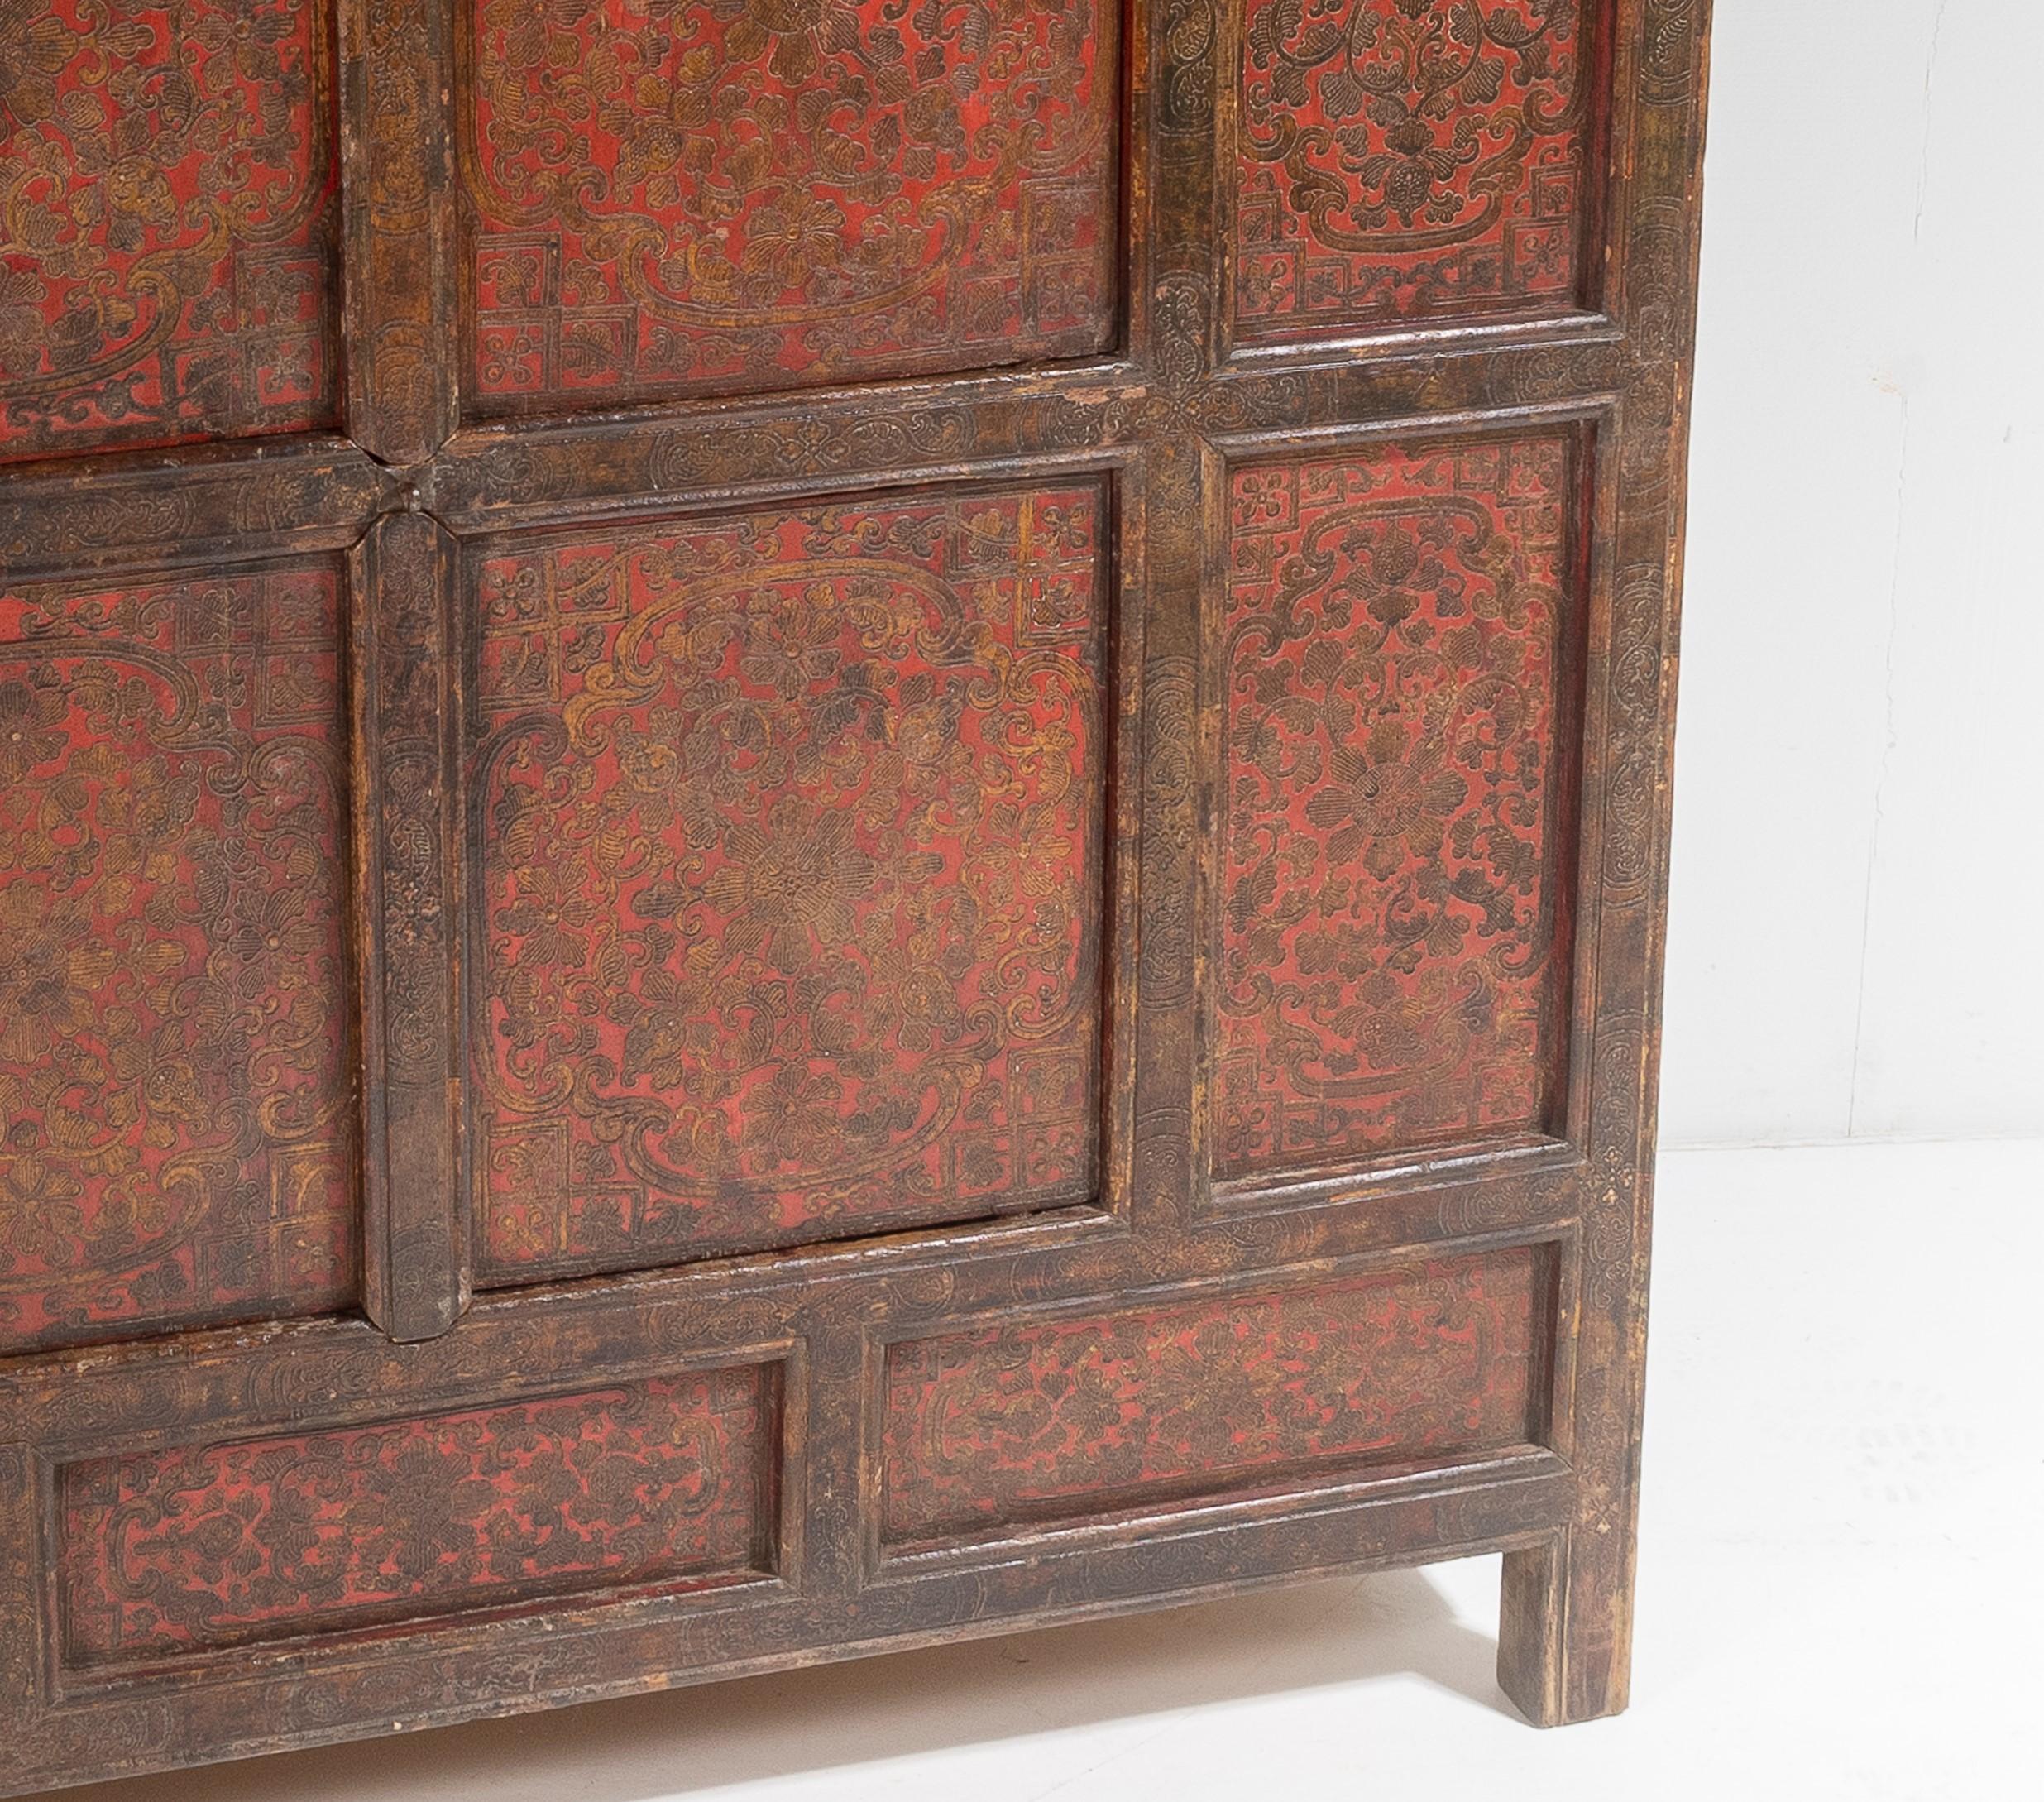 Original 19thC Large Chinese Tibetan Hand Painted Lacquered Cupboard Sideboard en vente 2